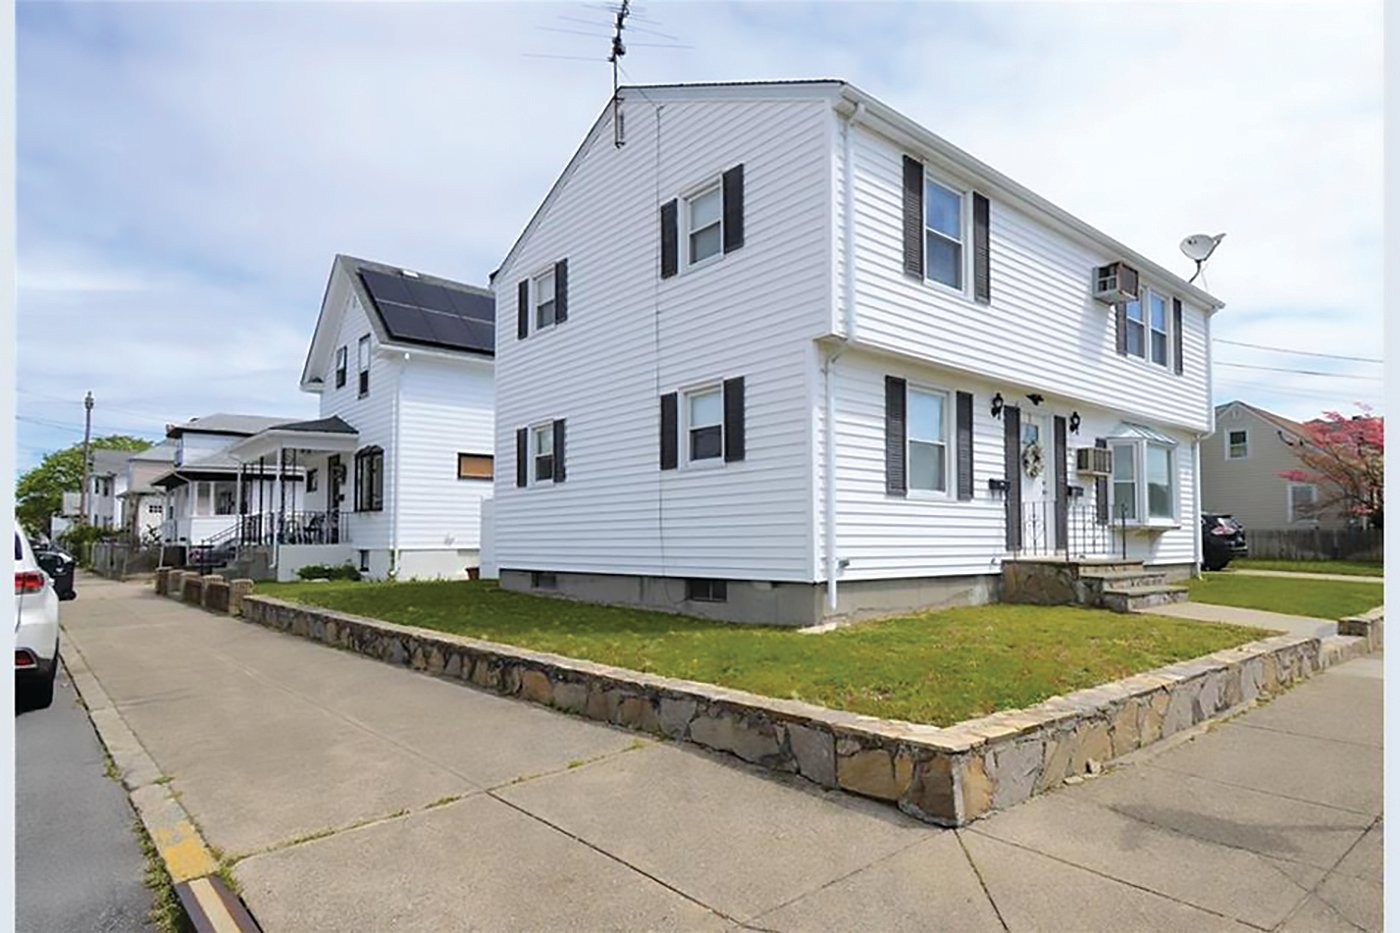 Paula Martel cited this recent property sale as an example of the hot market for multi-family homes. Located in the Darlington area of Pawtucket, it attracted nearly 40 potential buyers to an open house. Six made offers. All were above-asking. It sold within 48 hours.